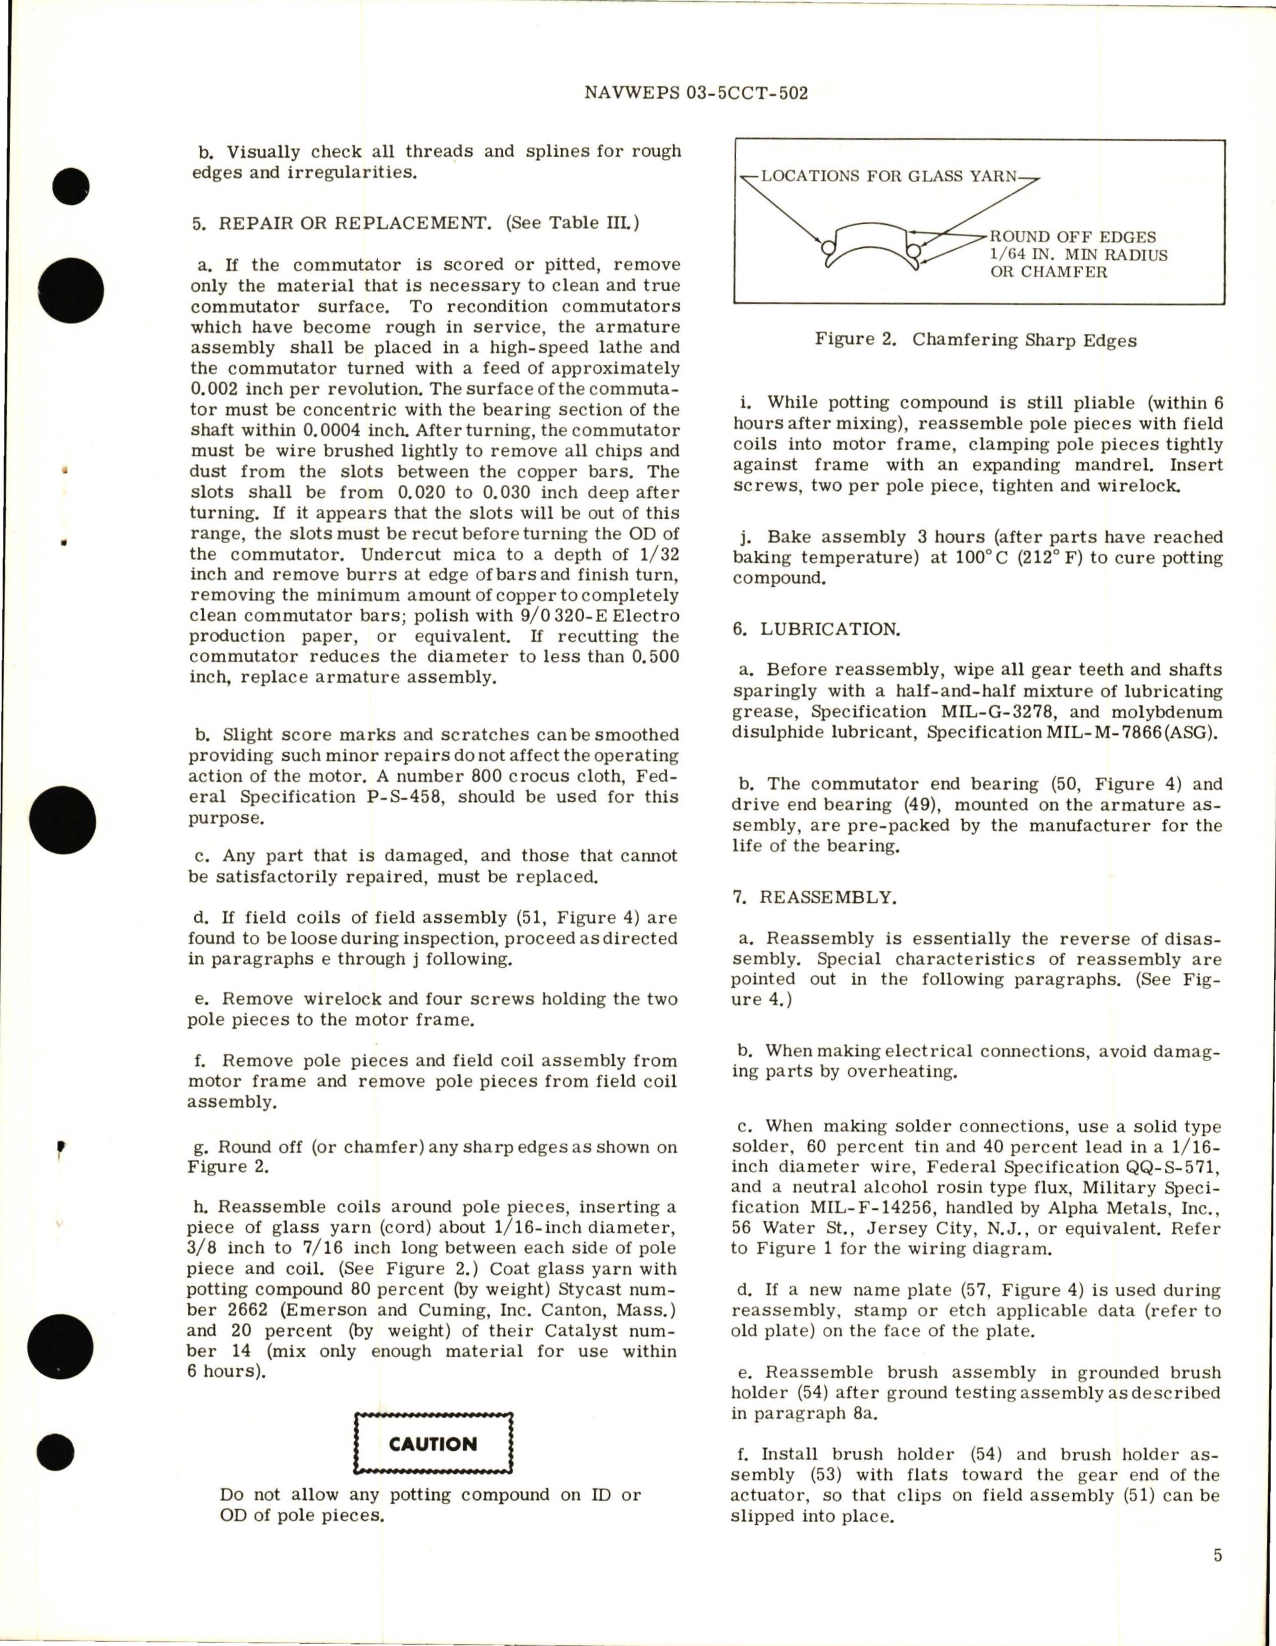 Sample page 5 from AirCorps Library document: Overhaul Instructions with Parts Breakdown for Electric Motor Actuator - Part 1436-543054